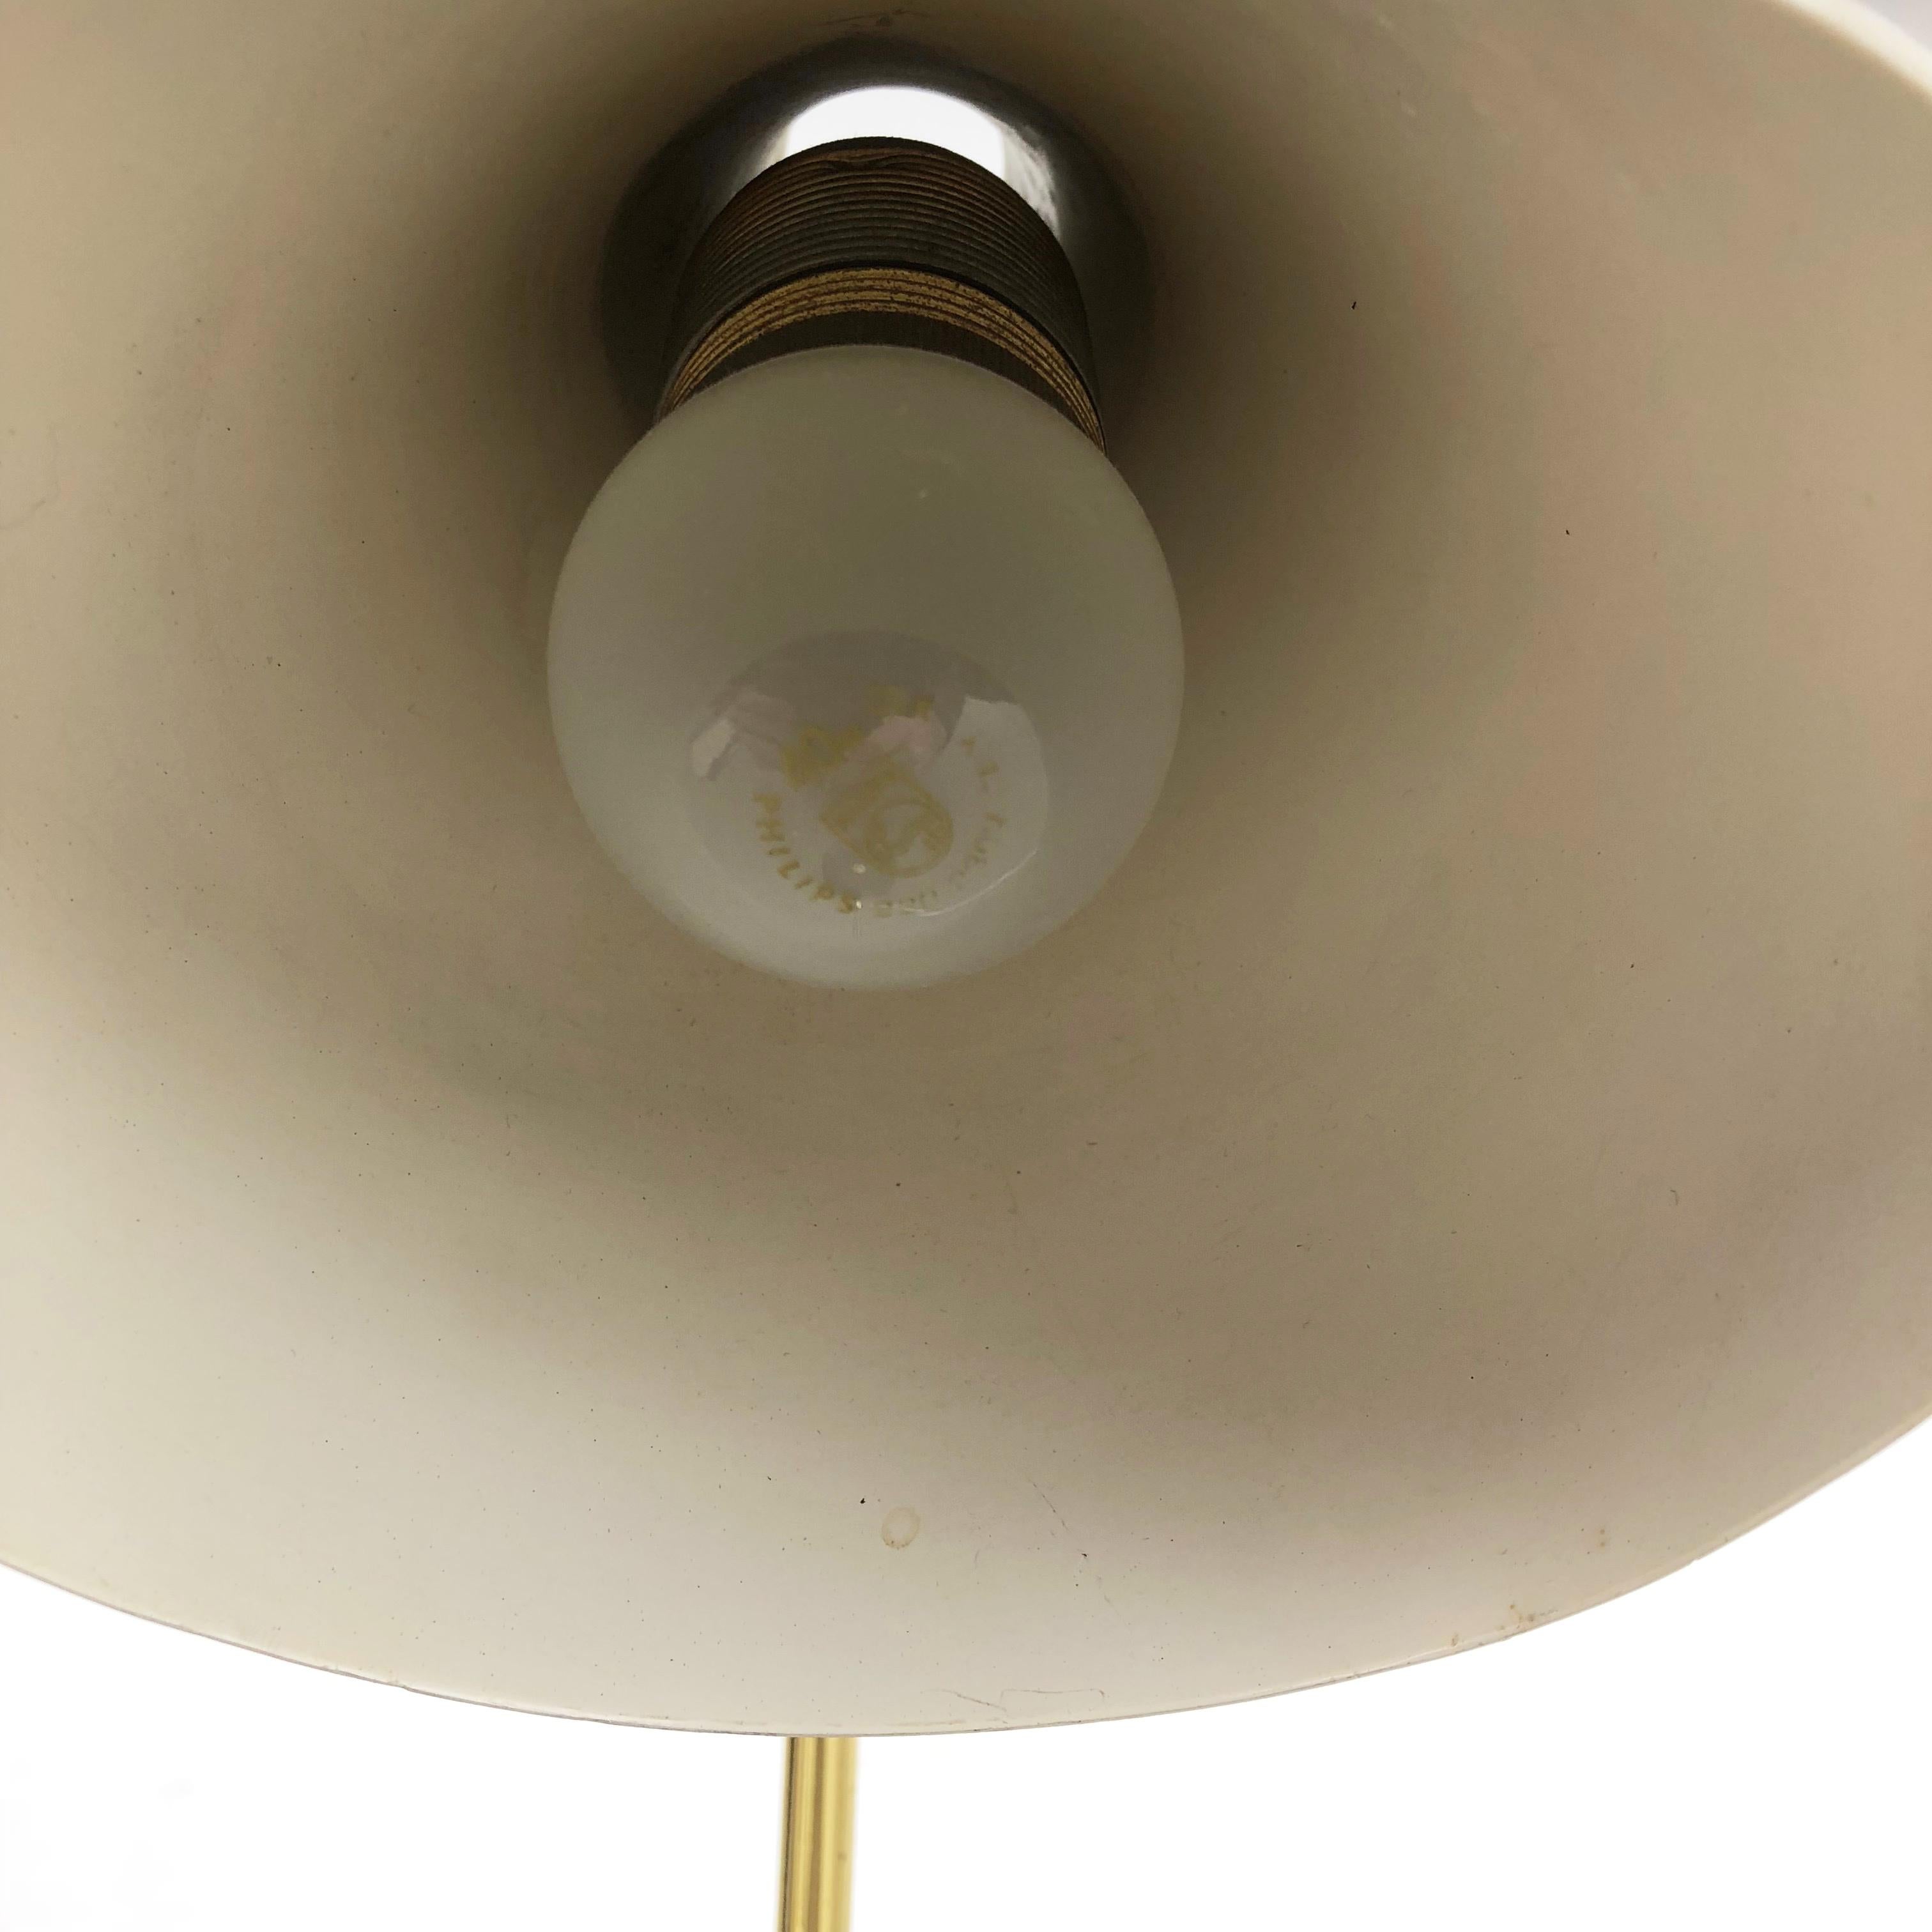 Original Modernist 1960s Metal Table Light Made by Cosack, Germany For Sale 2